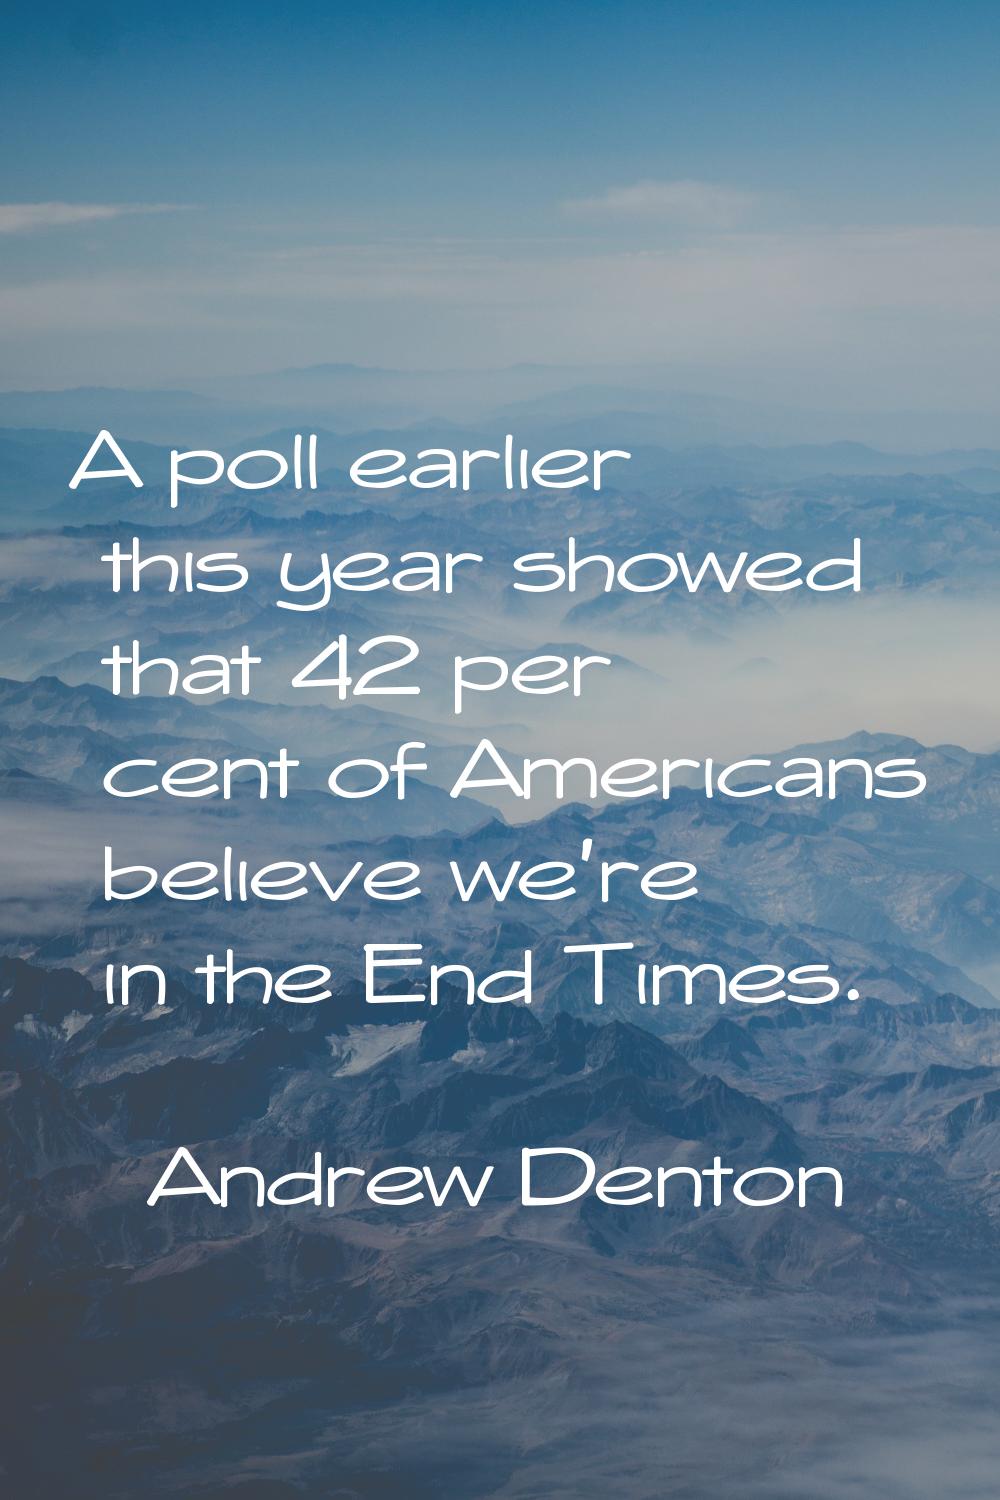 A poll earlier this year showed that 42 per cent of Americans believe we're in the End Times.